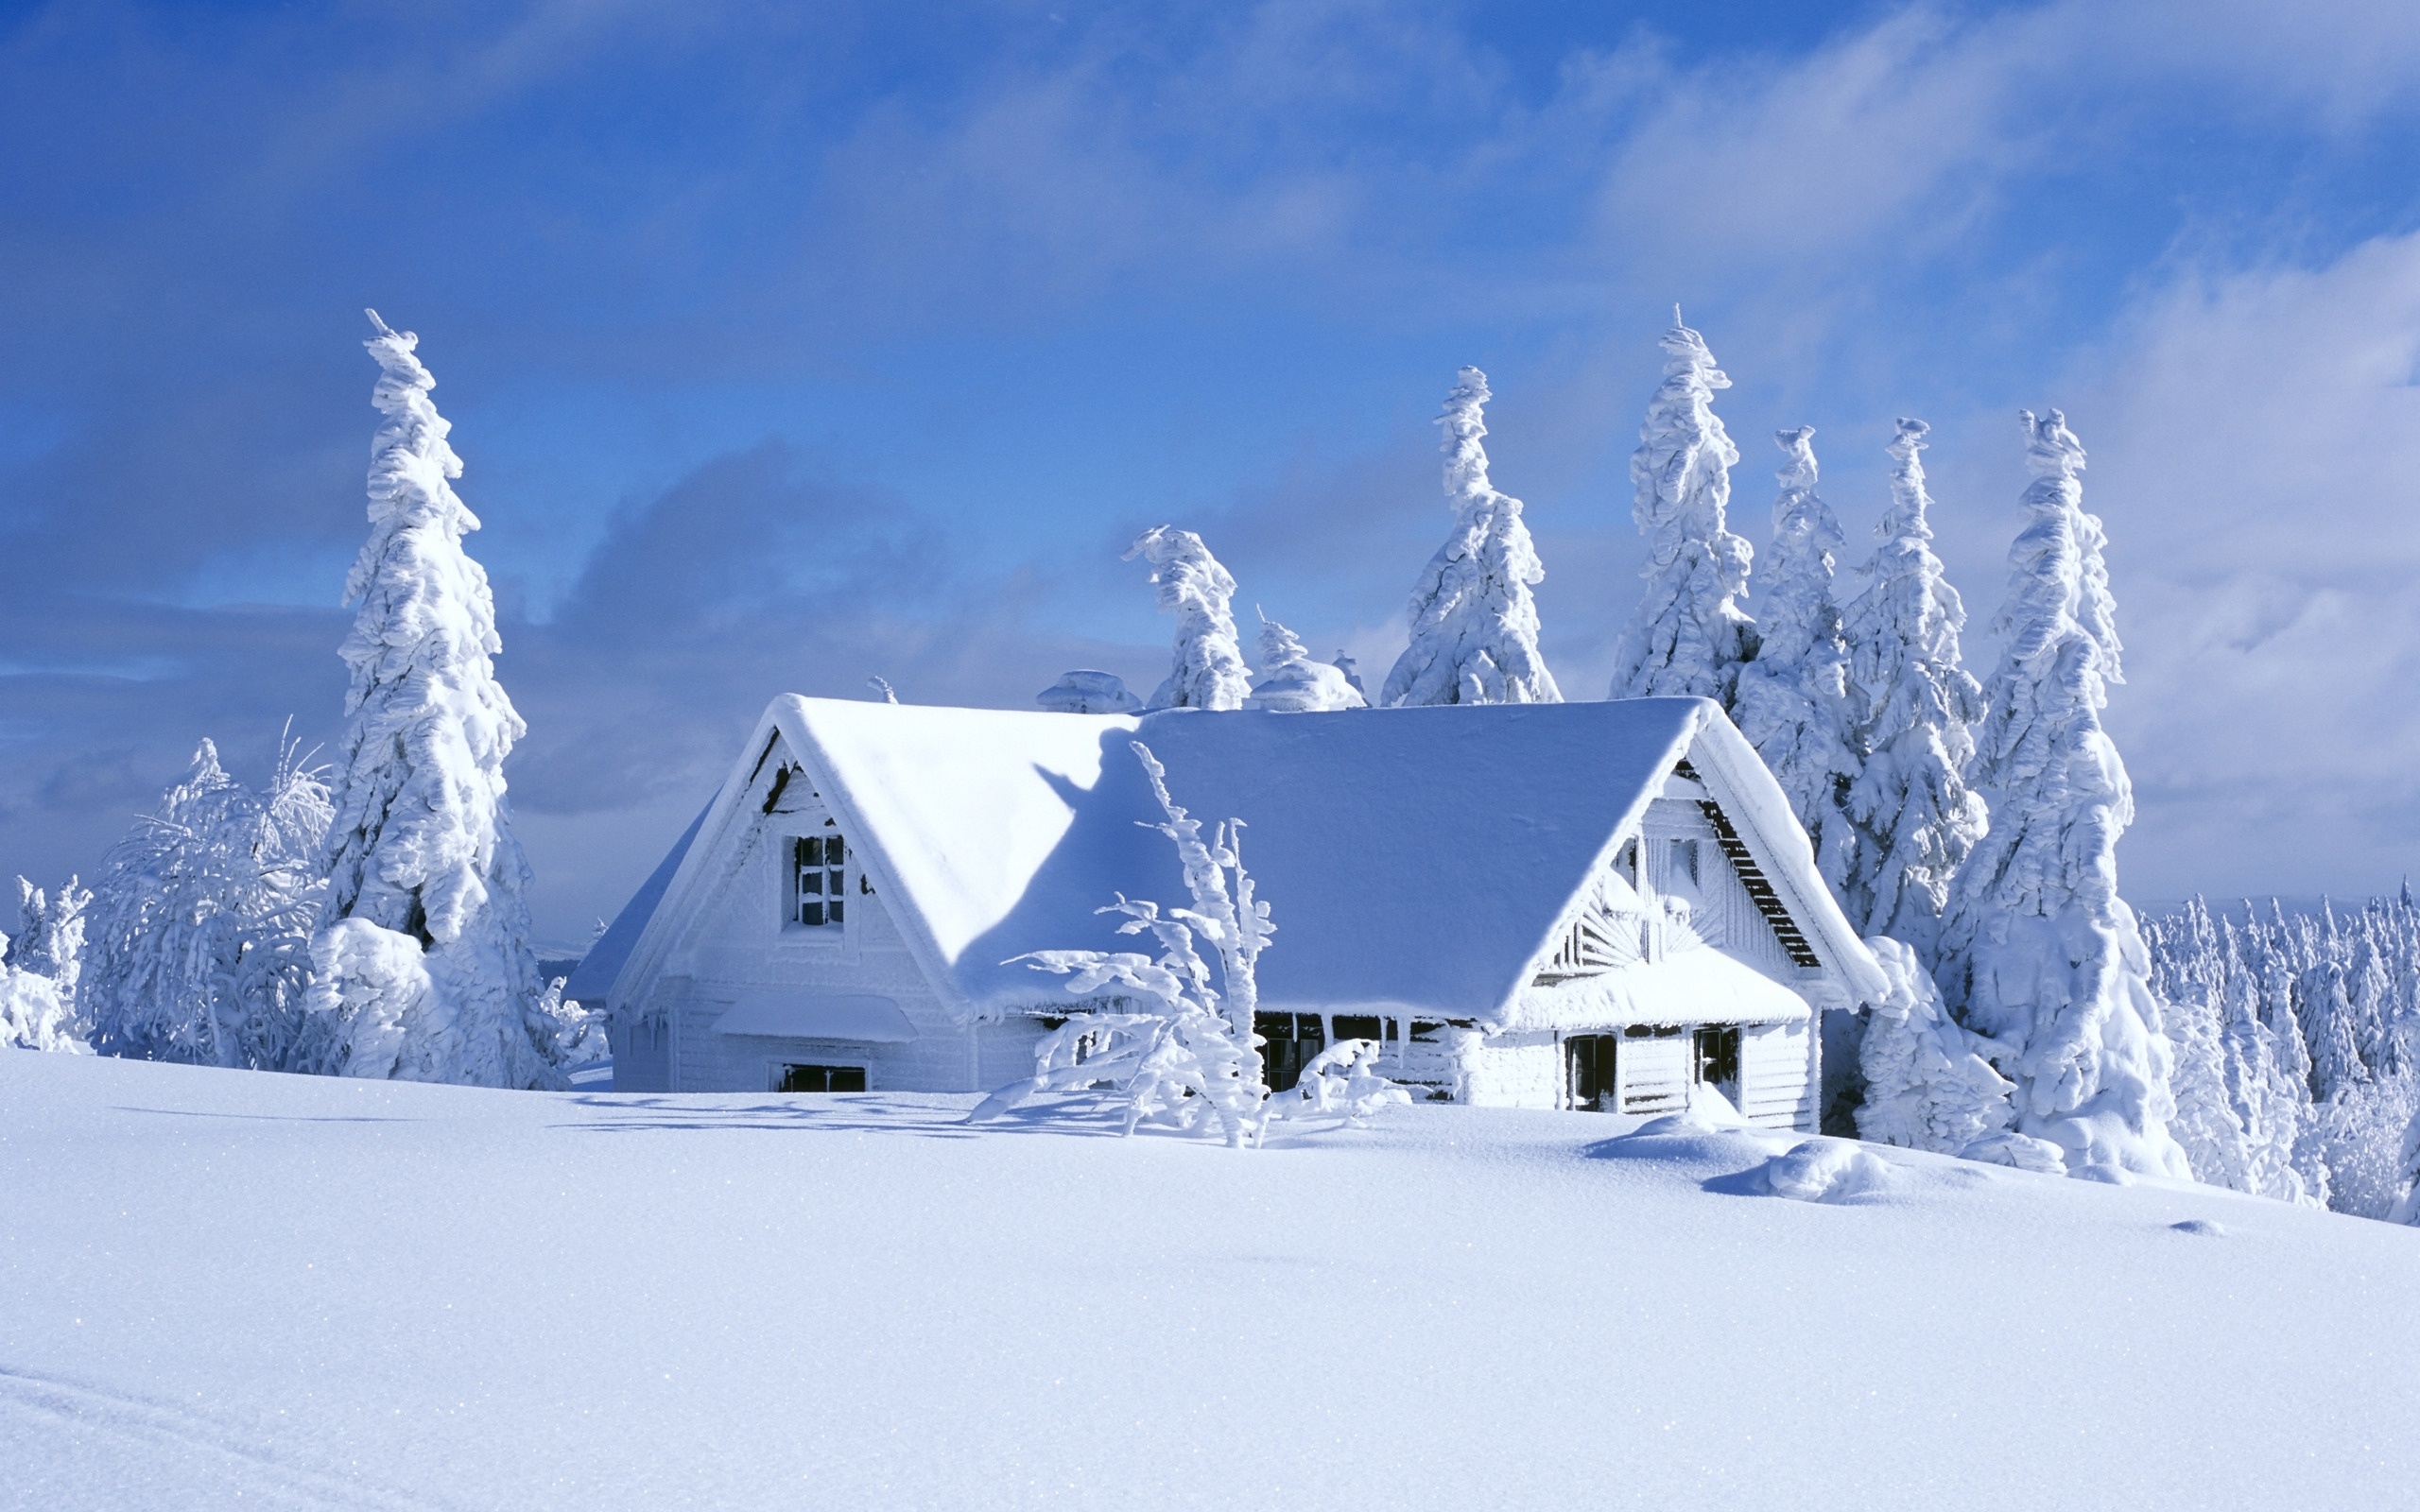 Snow wallpaper in high resolution for free Get House Covered In Snow